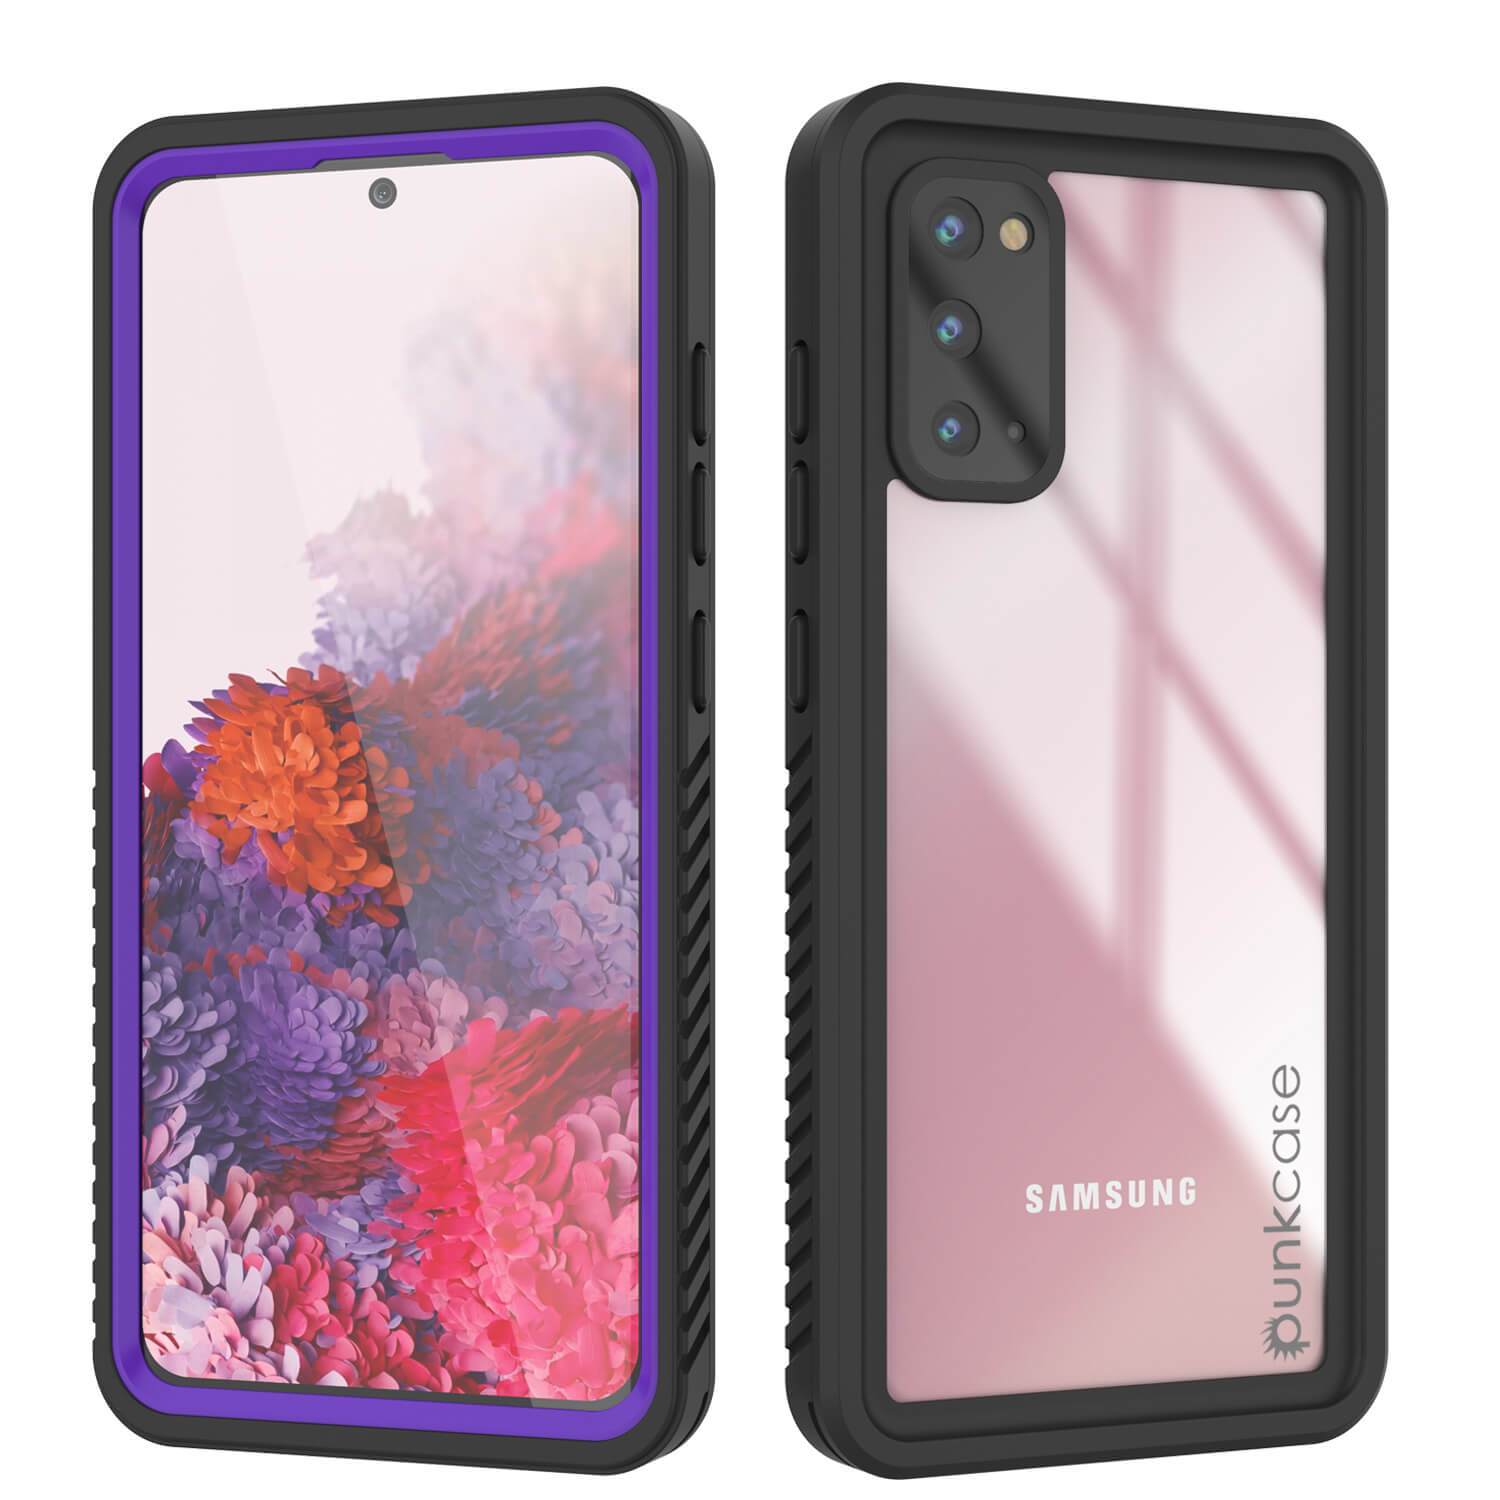 Galaxy S20 Water/Shockproof [Extreme Series] Slim Screen Protector Case [Purple]